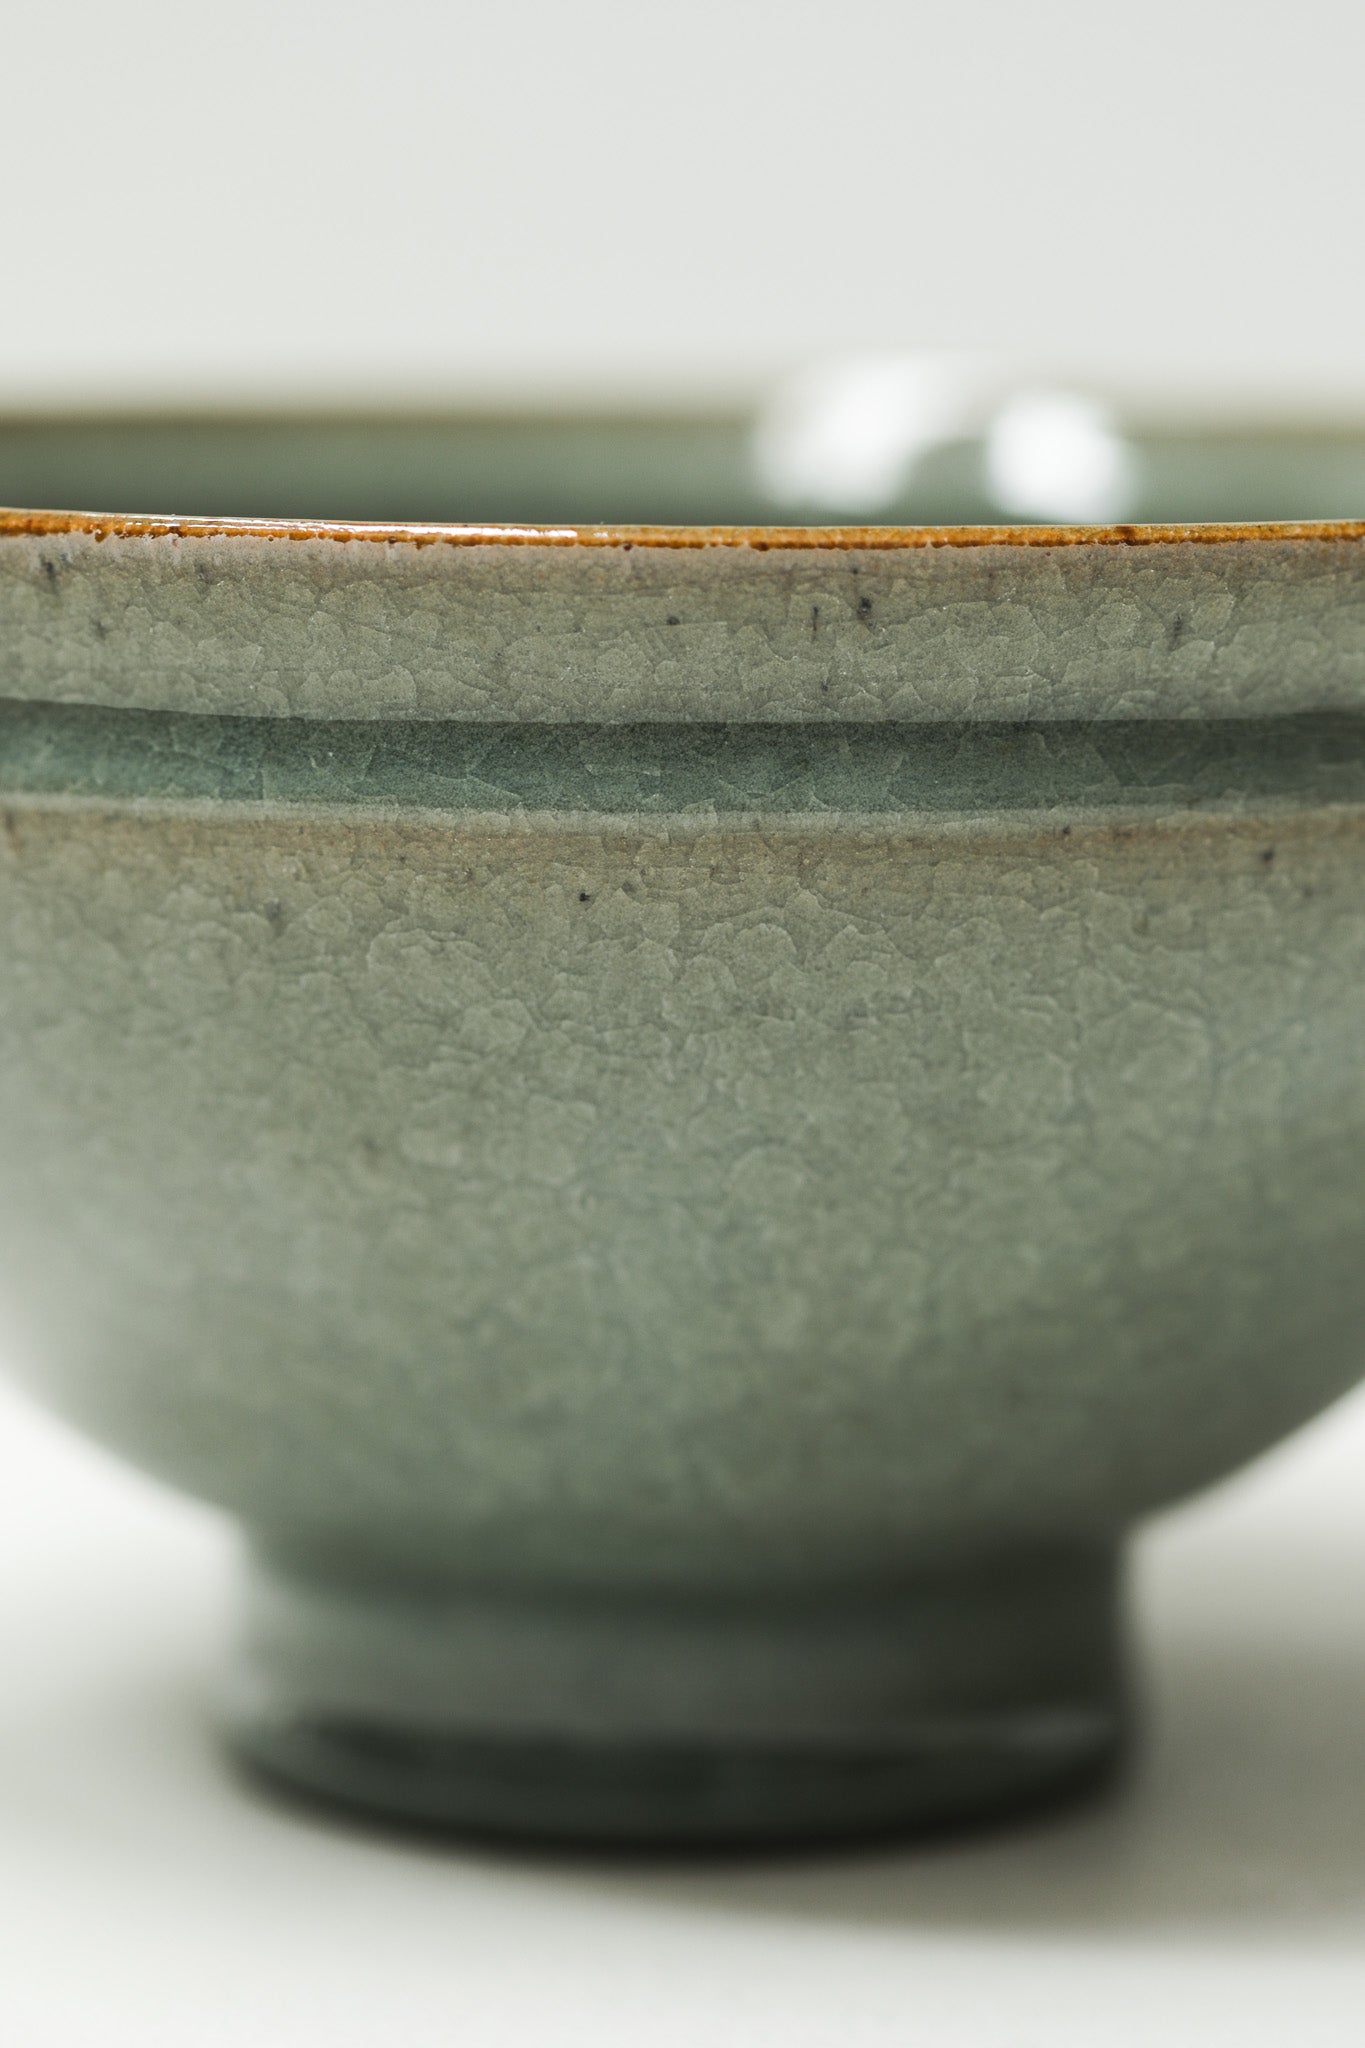 Florian Gadsby: Pair of Indented Bowls